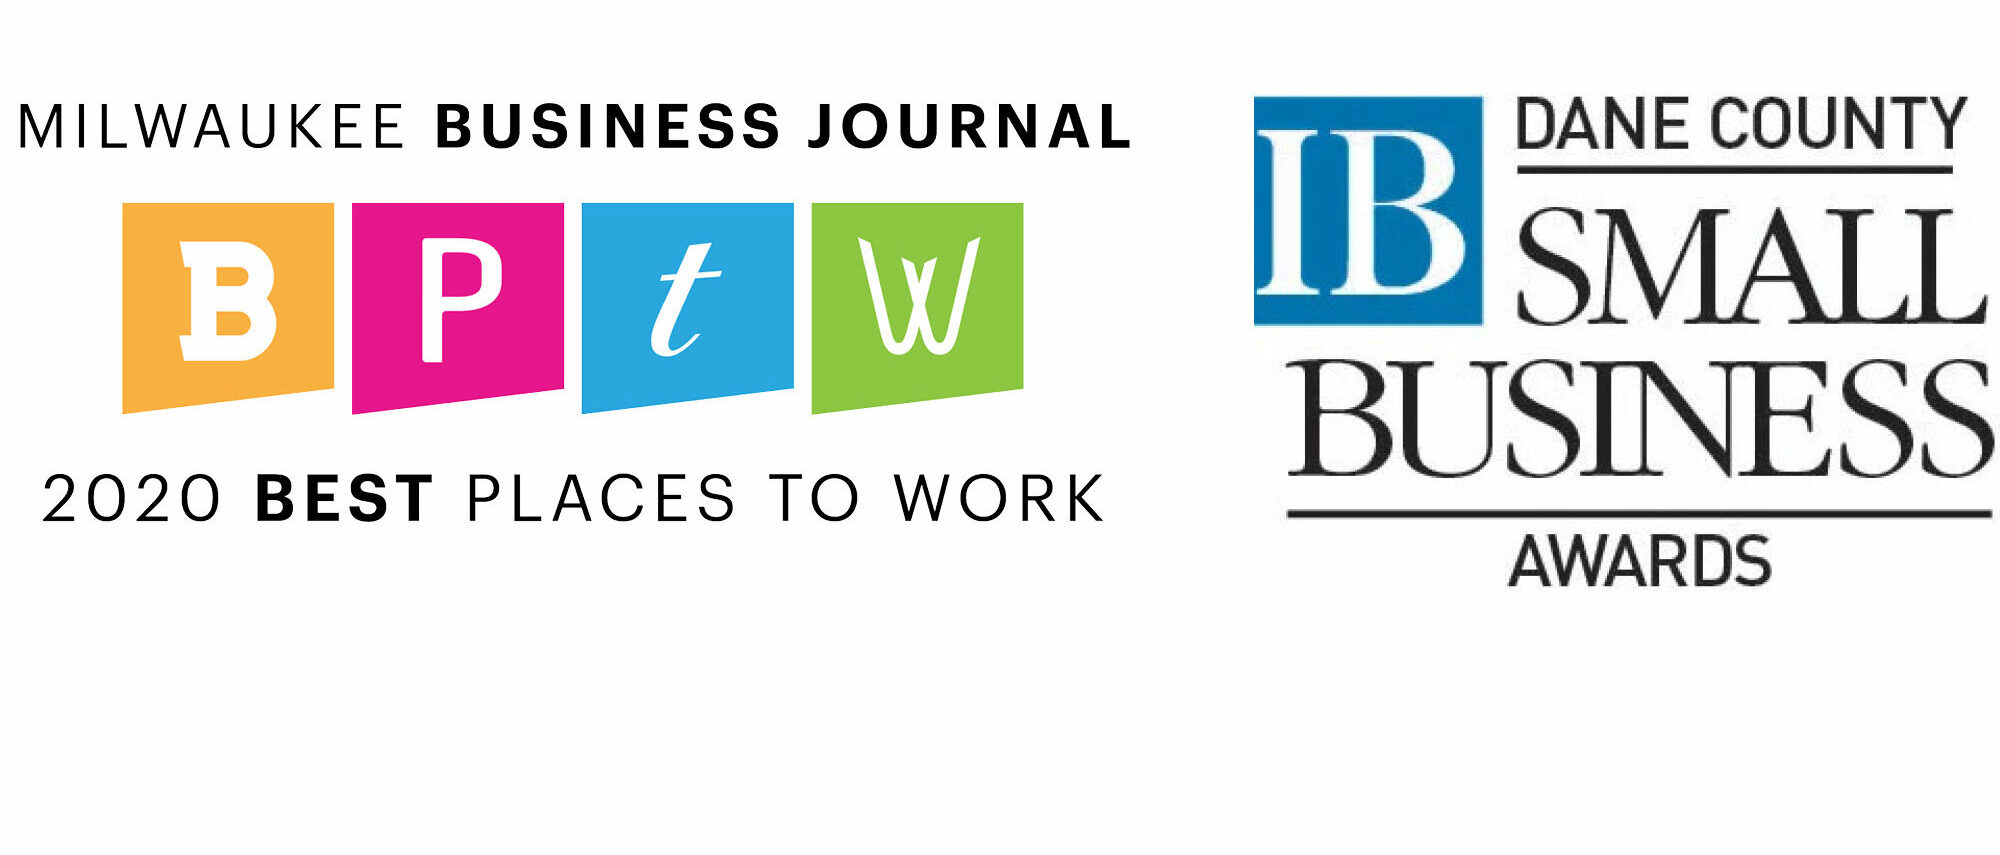 JLA Architects Recognized as Best Place to Work and Small Business Awards